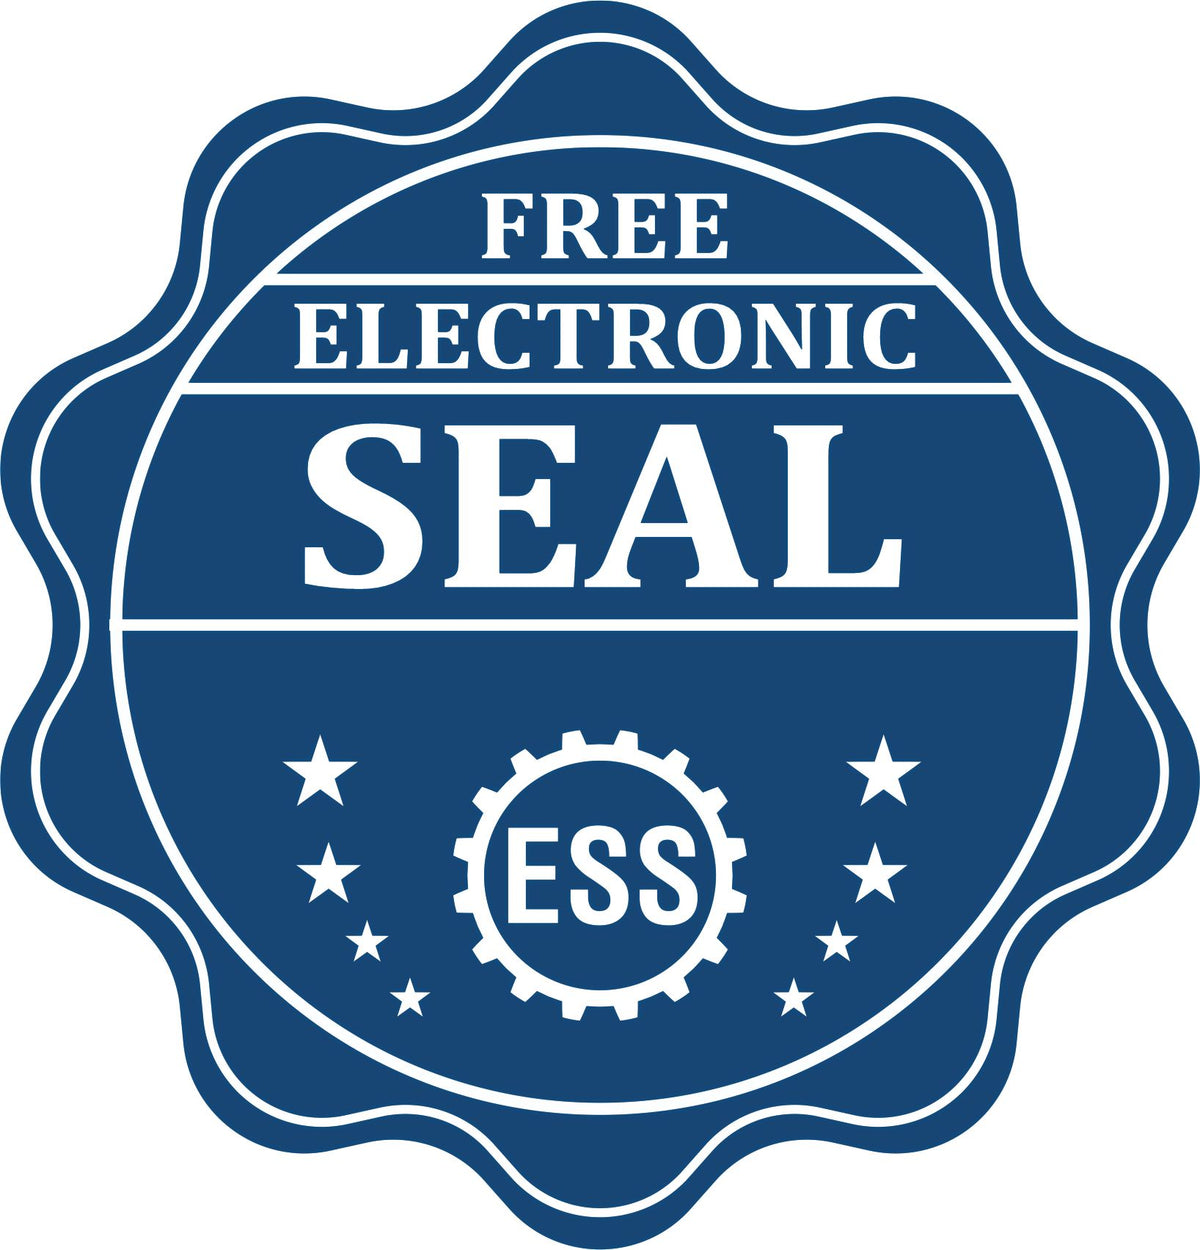 A badge showing a free electronic seal for the Heavy Duty Cast Iron Oklahoma Geologist Seal Embosser with stars and the ESS gear on the emblem.